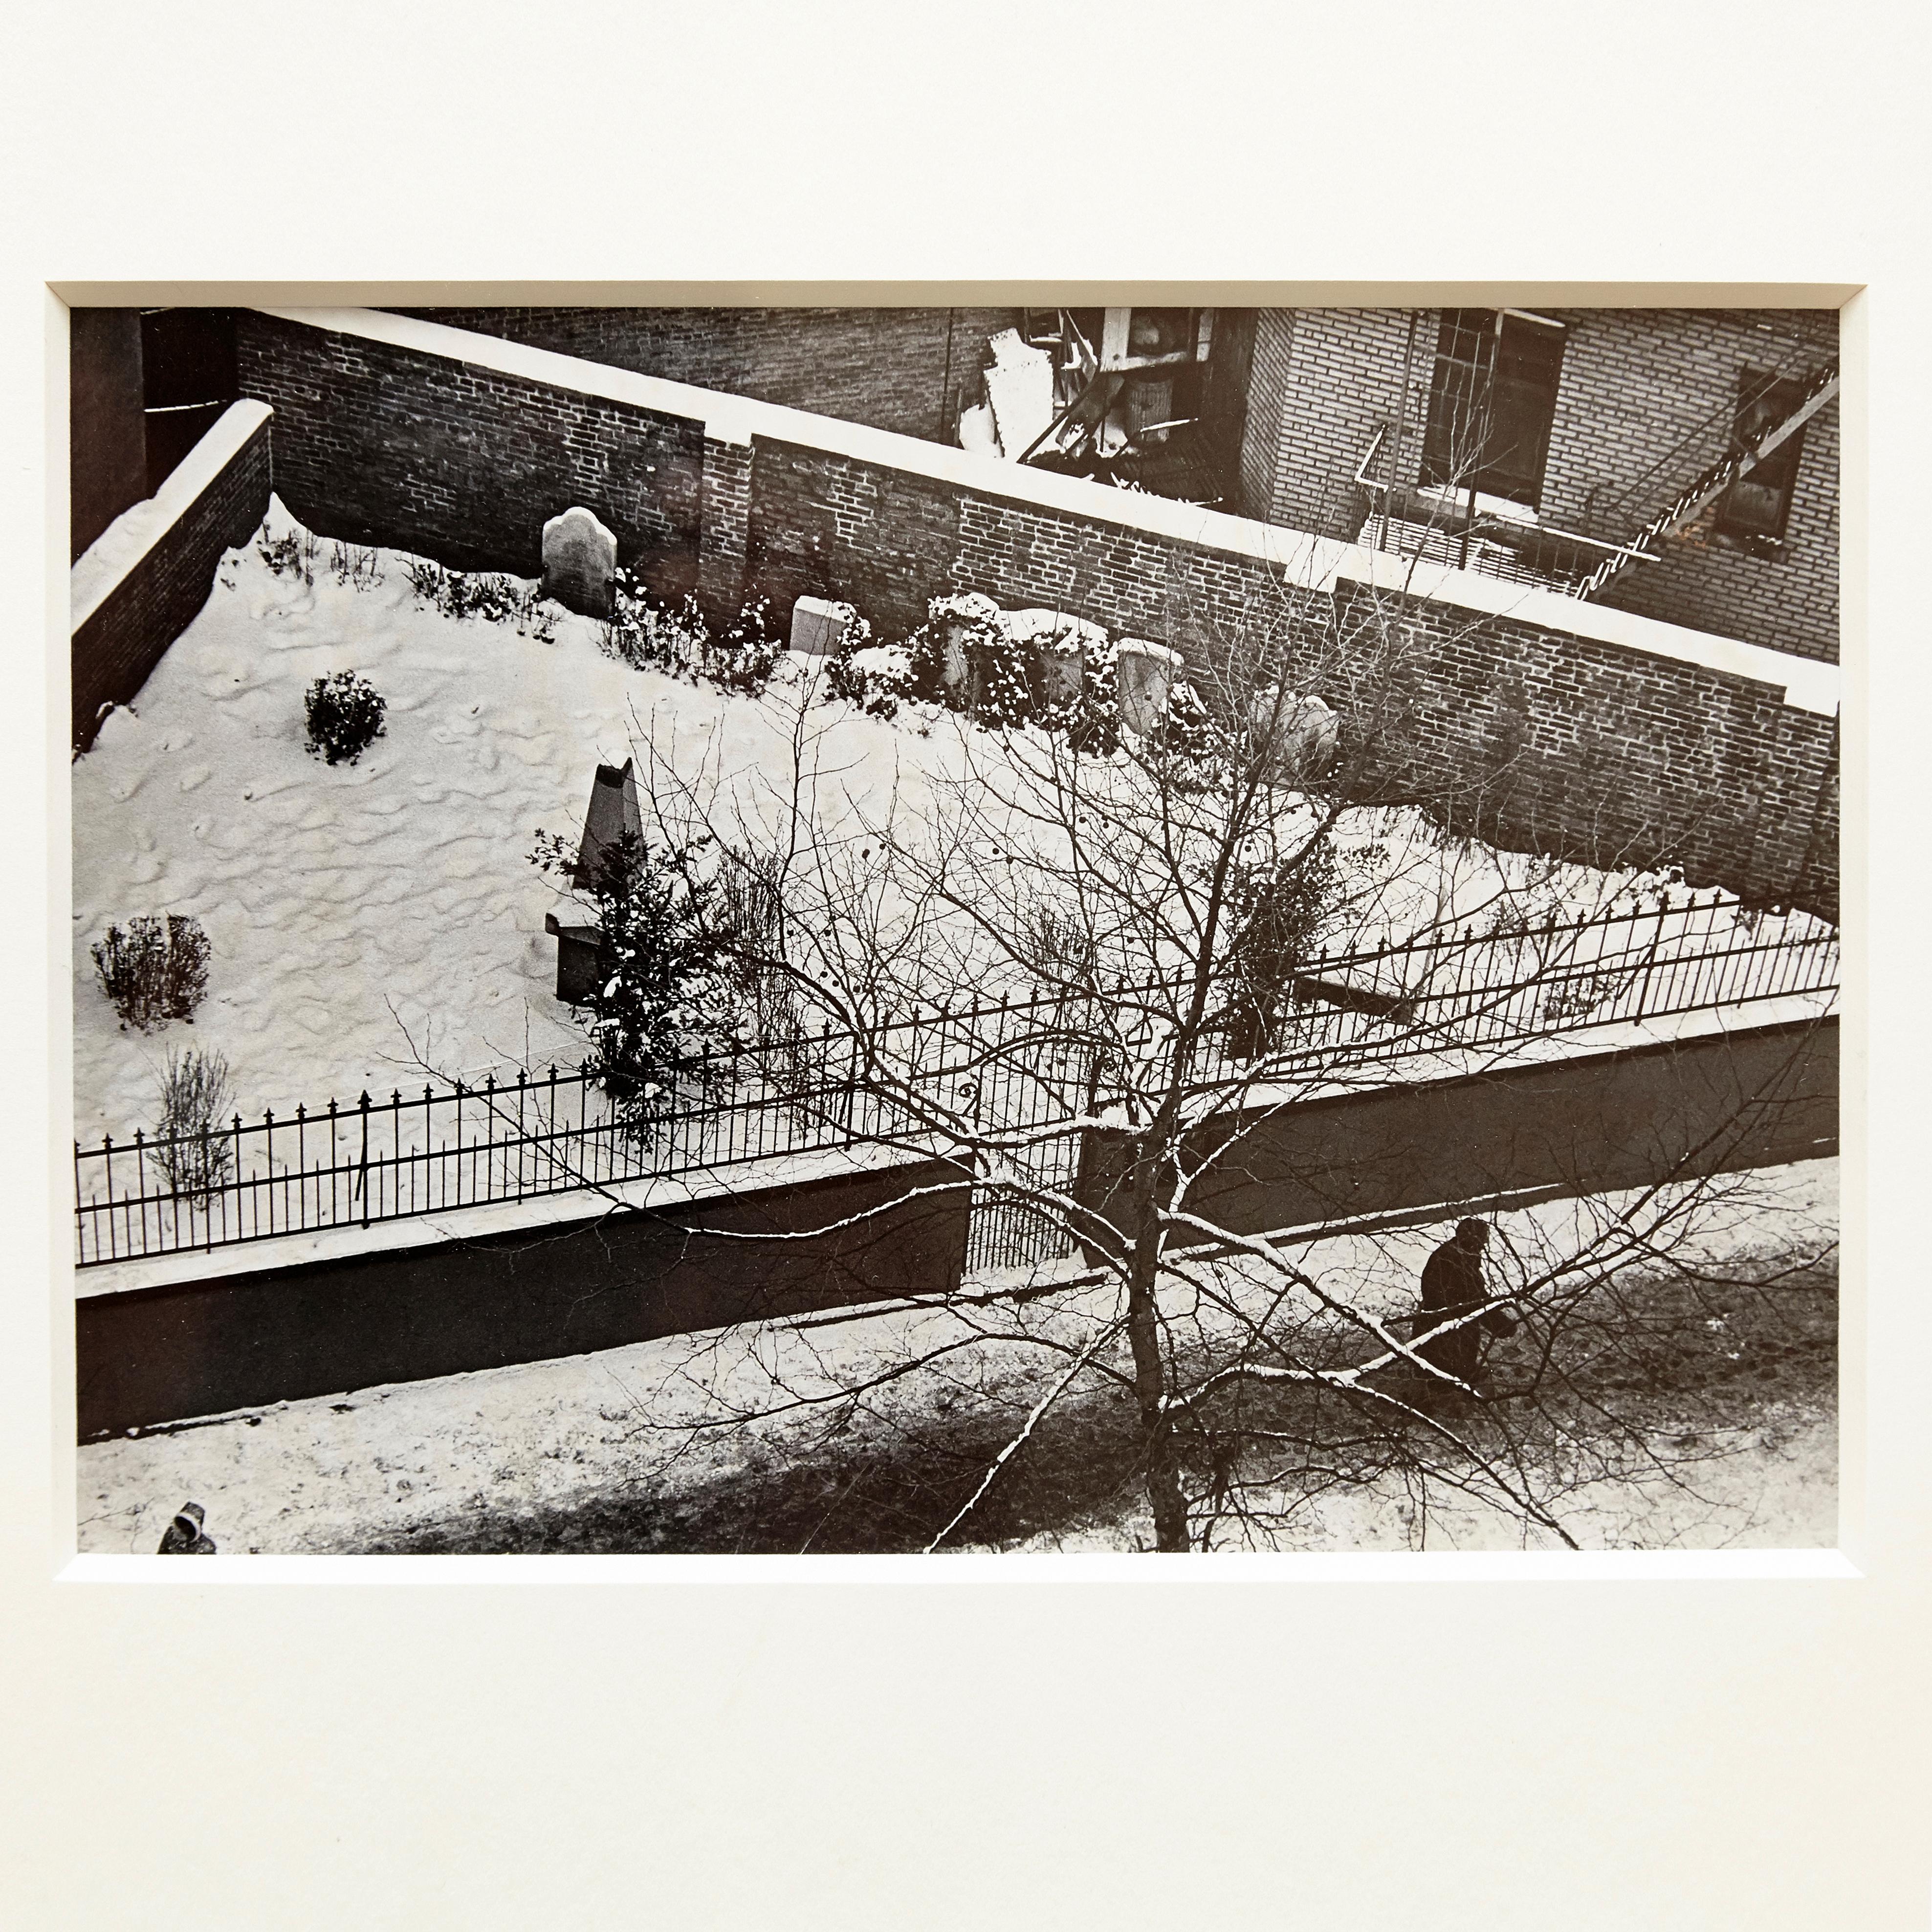 Andre Kerstesz Photography

Measures: 30 x 22 whitout frame
47.5 x 41 x 3 cm Framed

André Kertész (1894-1985)
Kertesz as a Hungarian-born photographer distinguished by haunting composition in his photographs and by his early efforts in